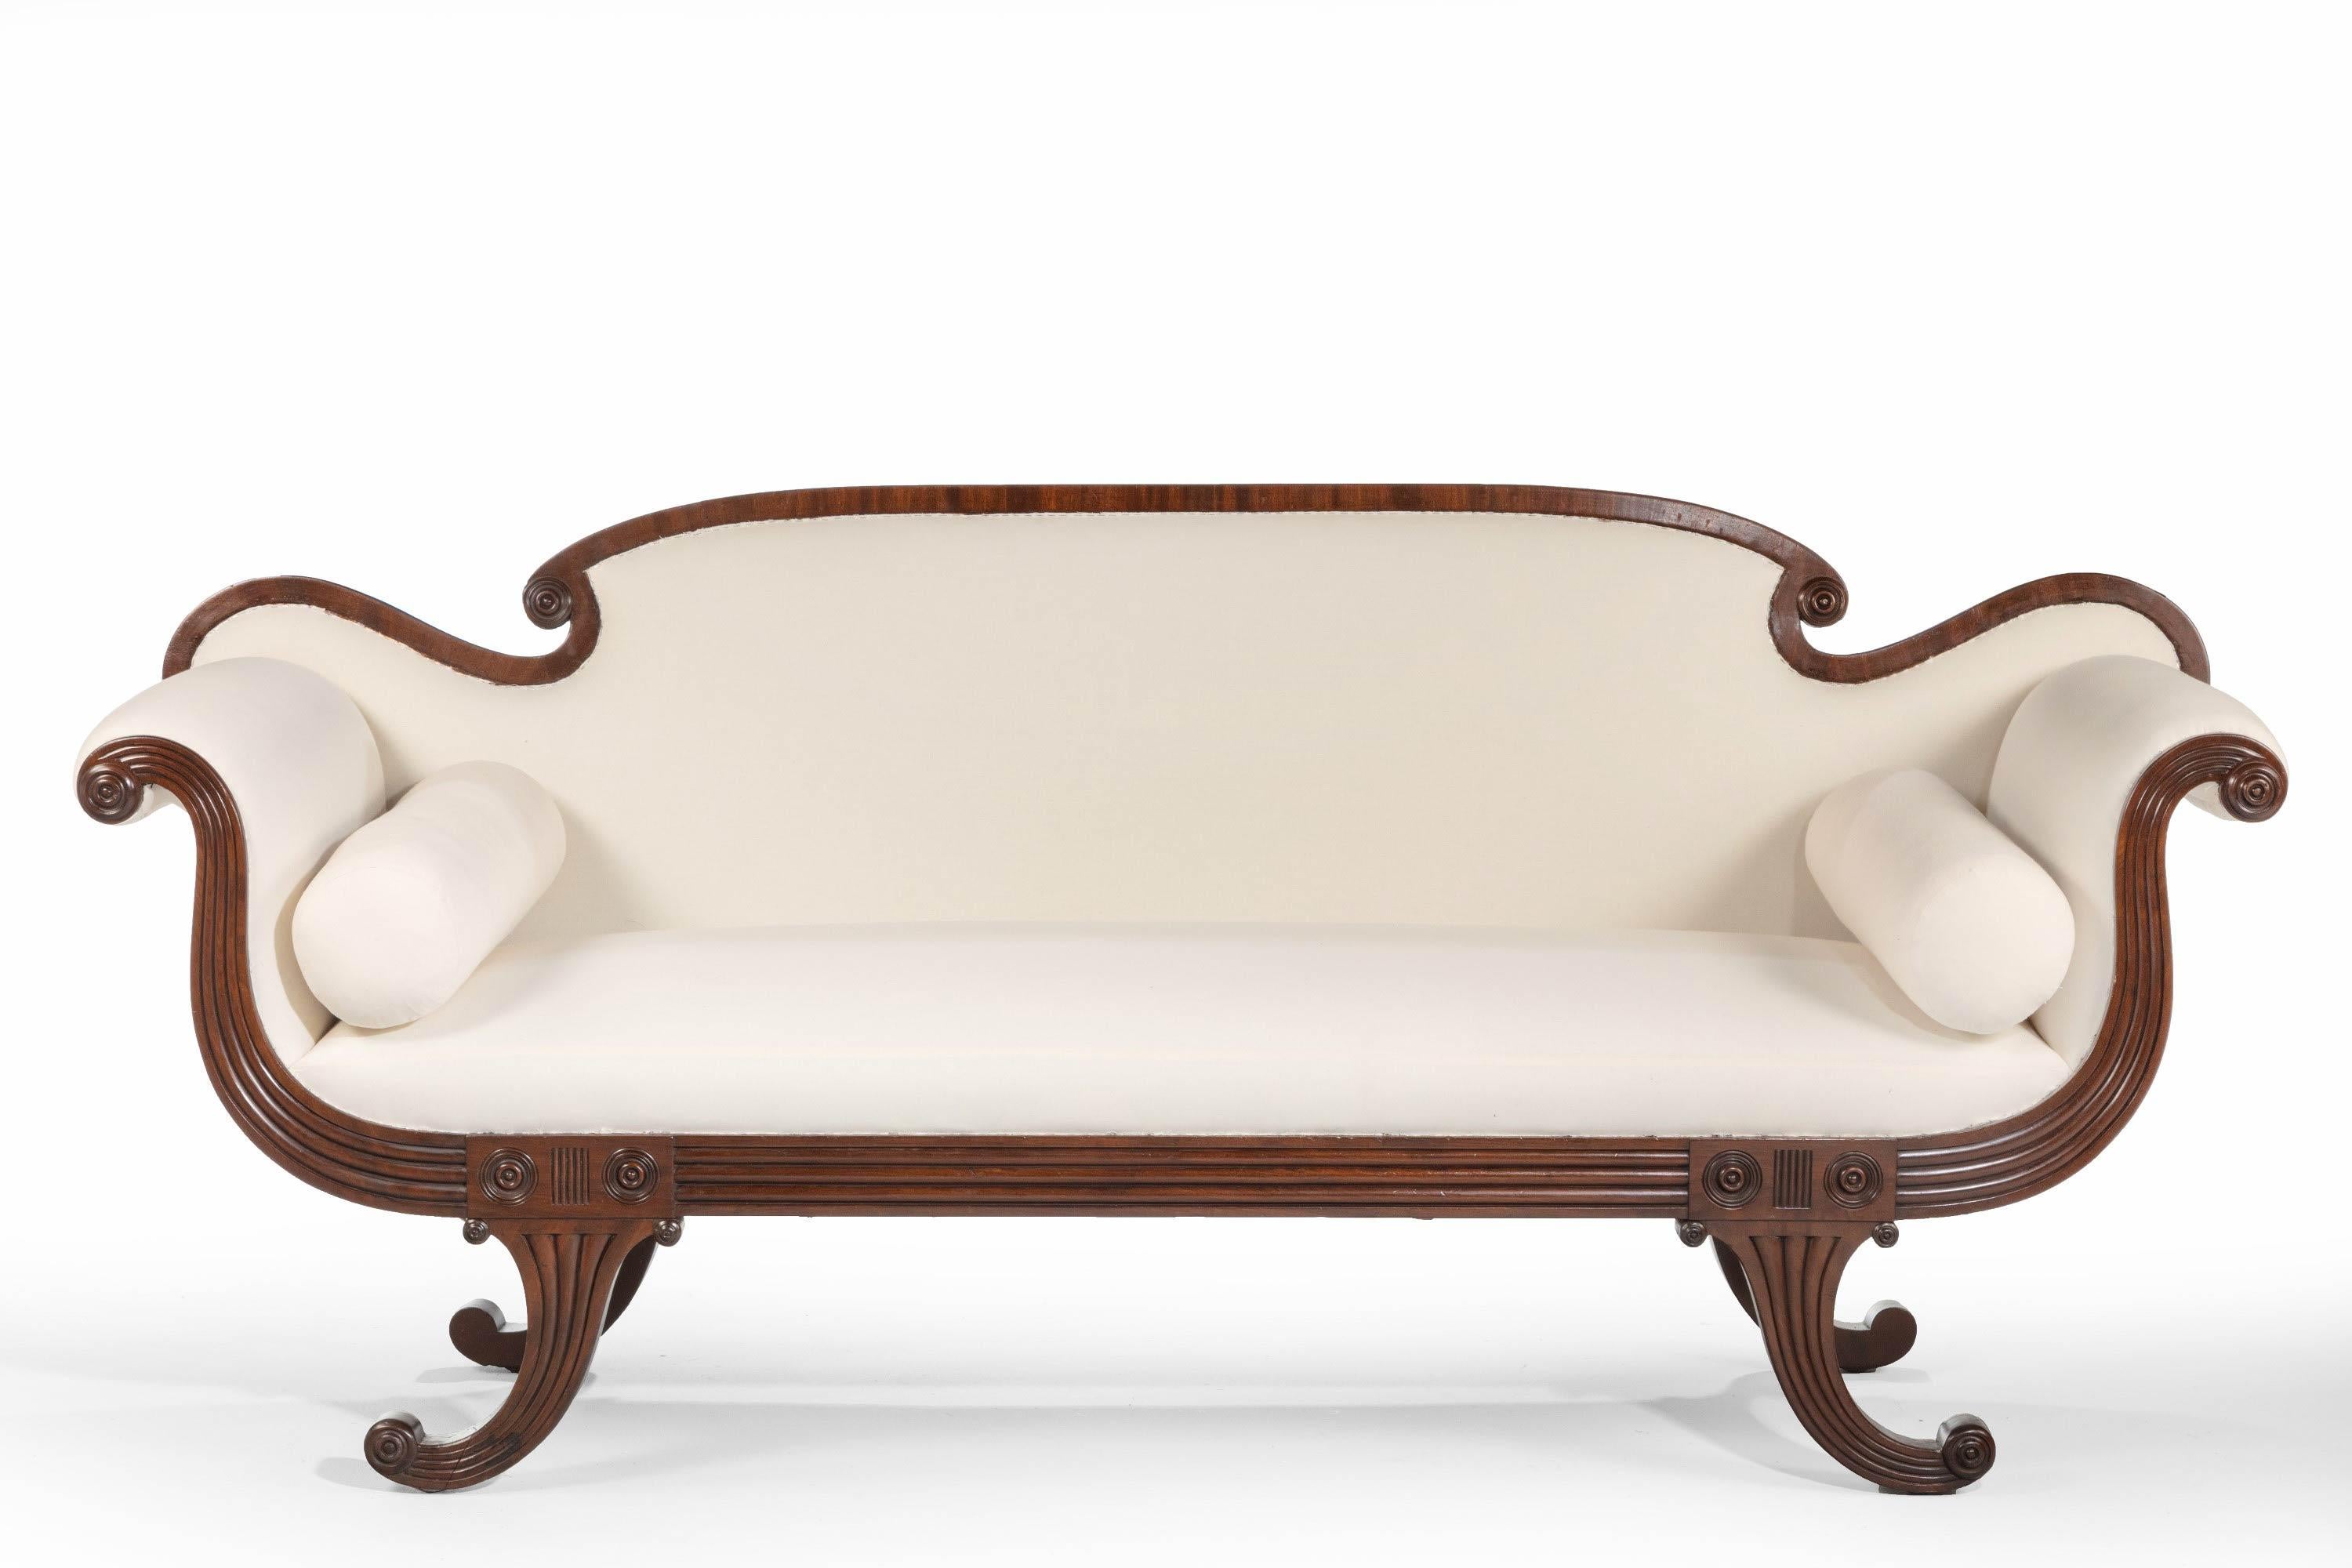 A mahogany framed Regency period sofa. With a most attractive continuous border on strong sabre legs. Excellent overall shape and condition. Newly upholstered to white. 

Seat height: 21 inches.
 